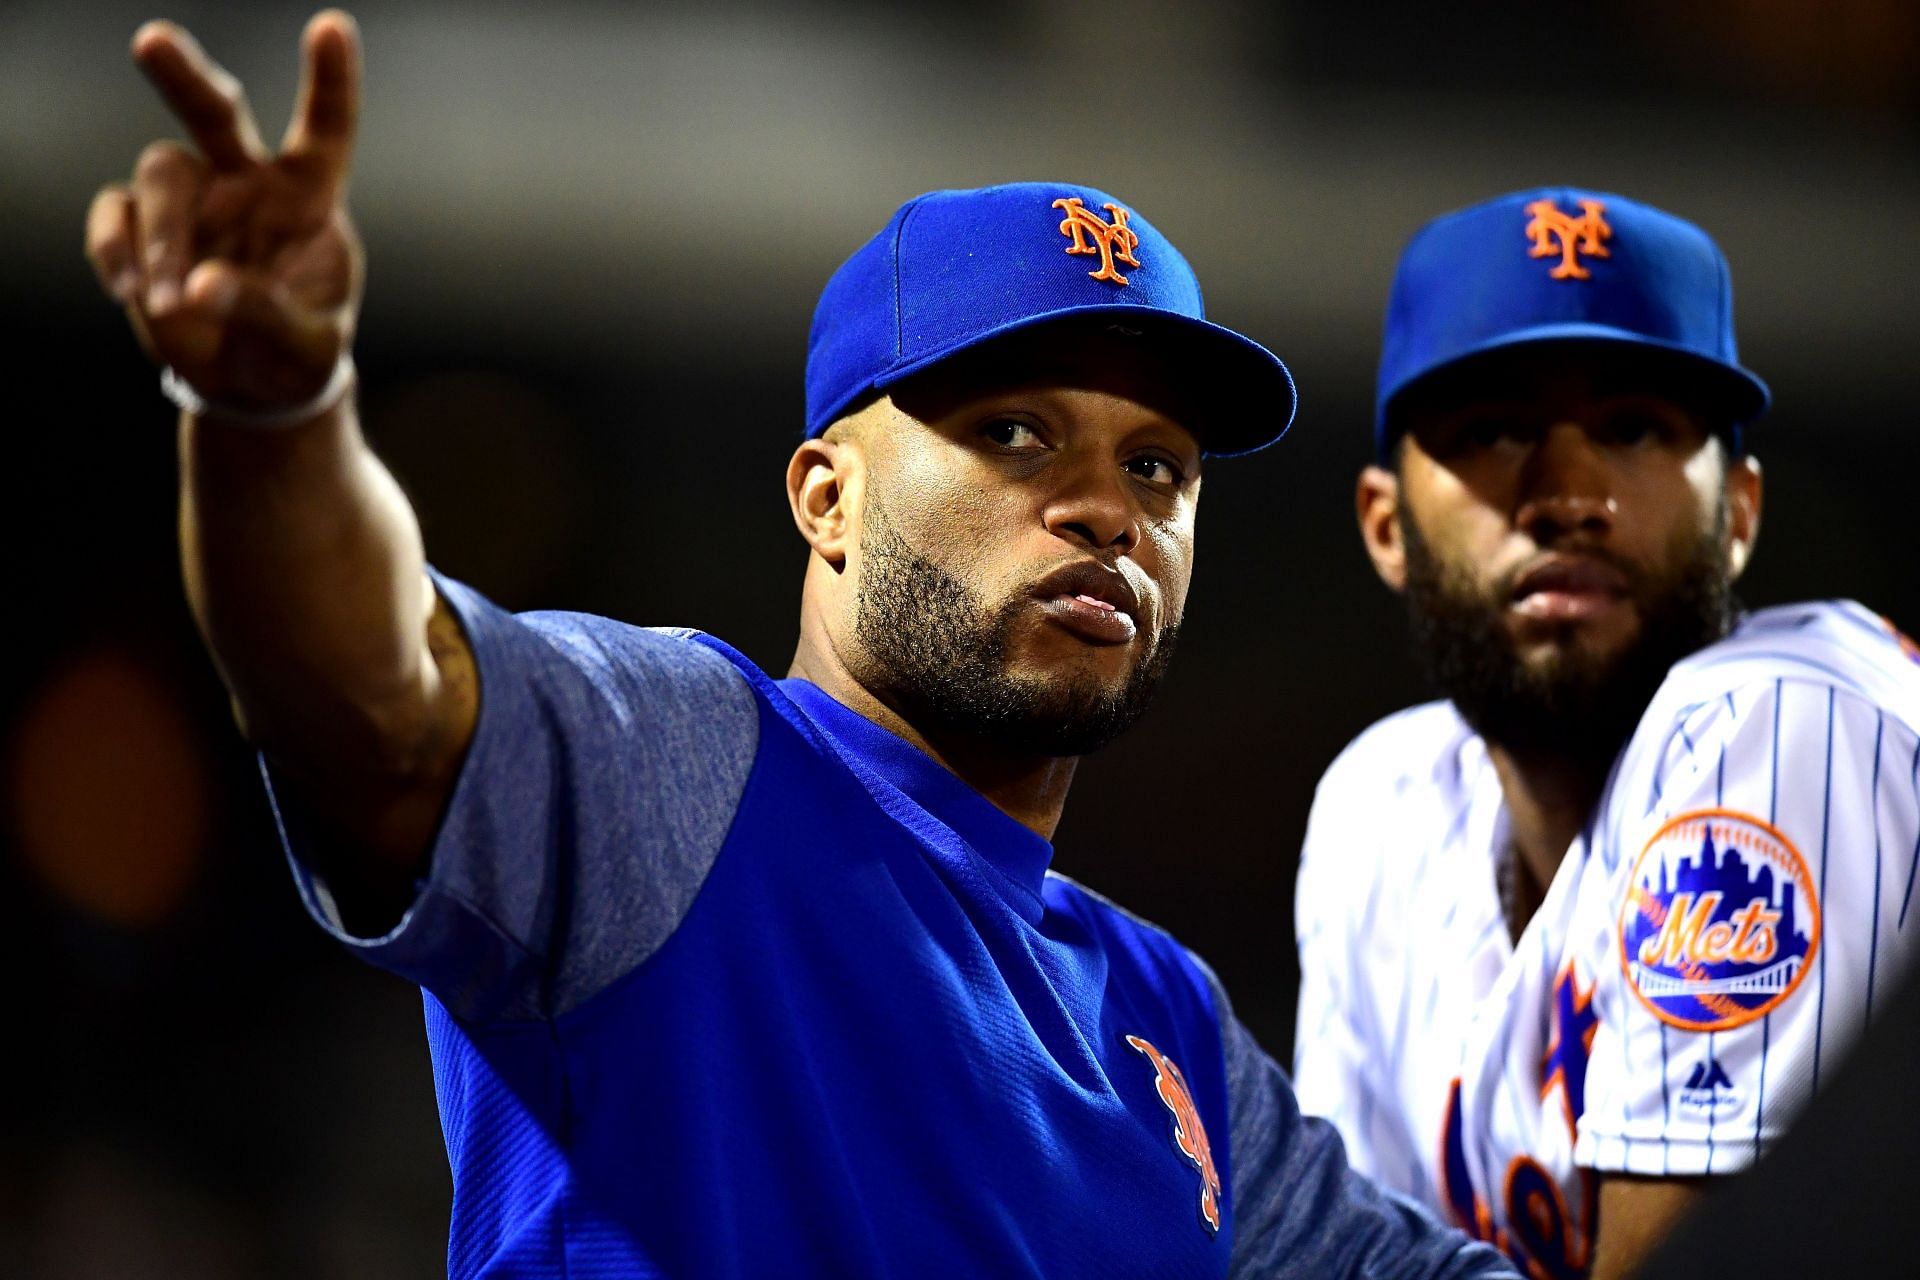 The New York Mets released second baseman Robinson Cano to free agency Monday.